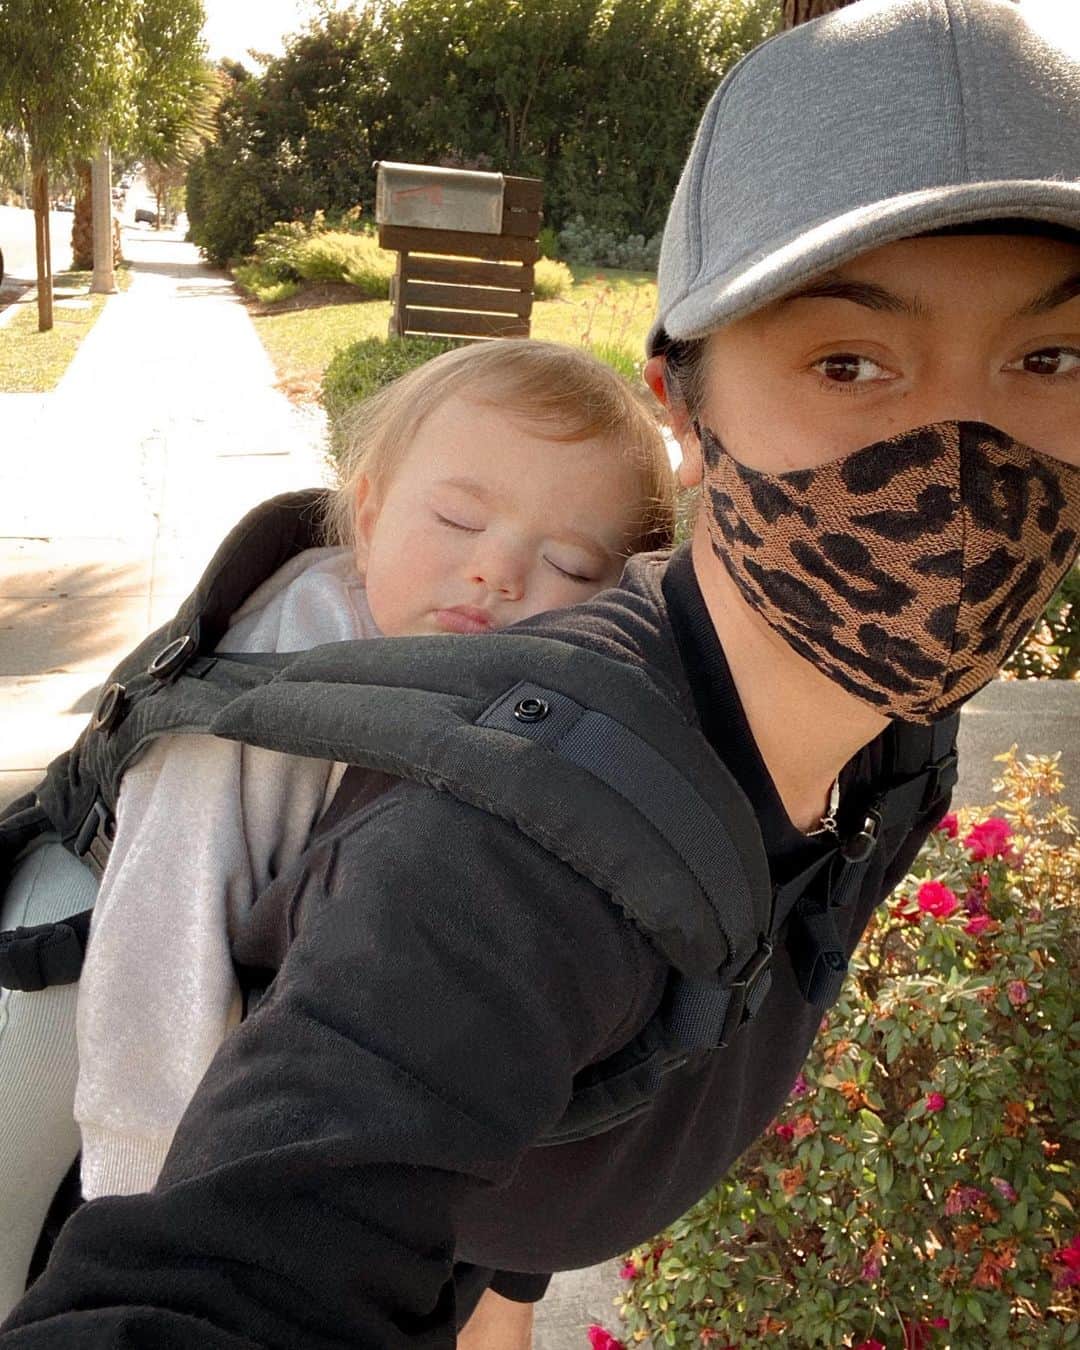 Bianca Cheah Chalmersのインスタグラム：「He was due for his nap at 11.30am, but I really wanted to do my hill workout 🤔. I also don’t like to disturb his daytime nap routine cause it throws his nighttime sleep off. So I strapped him to my back like a koala and did my 45 min routine up and down the hill while he slept the WHOLE time. When I got home I transferred him straight into his crib and he didn’t wake up till 2.30pm 🥰 — what a little nap trooper!  *Note strapping baby to back without help takes a few tries 🤣 and adds 12kgs/ 26lbs to the workout 💪🏽」